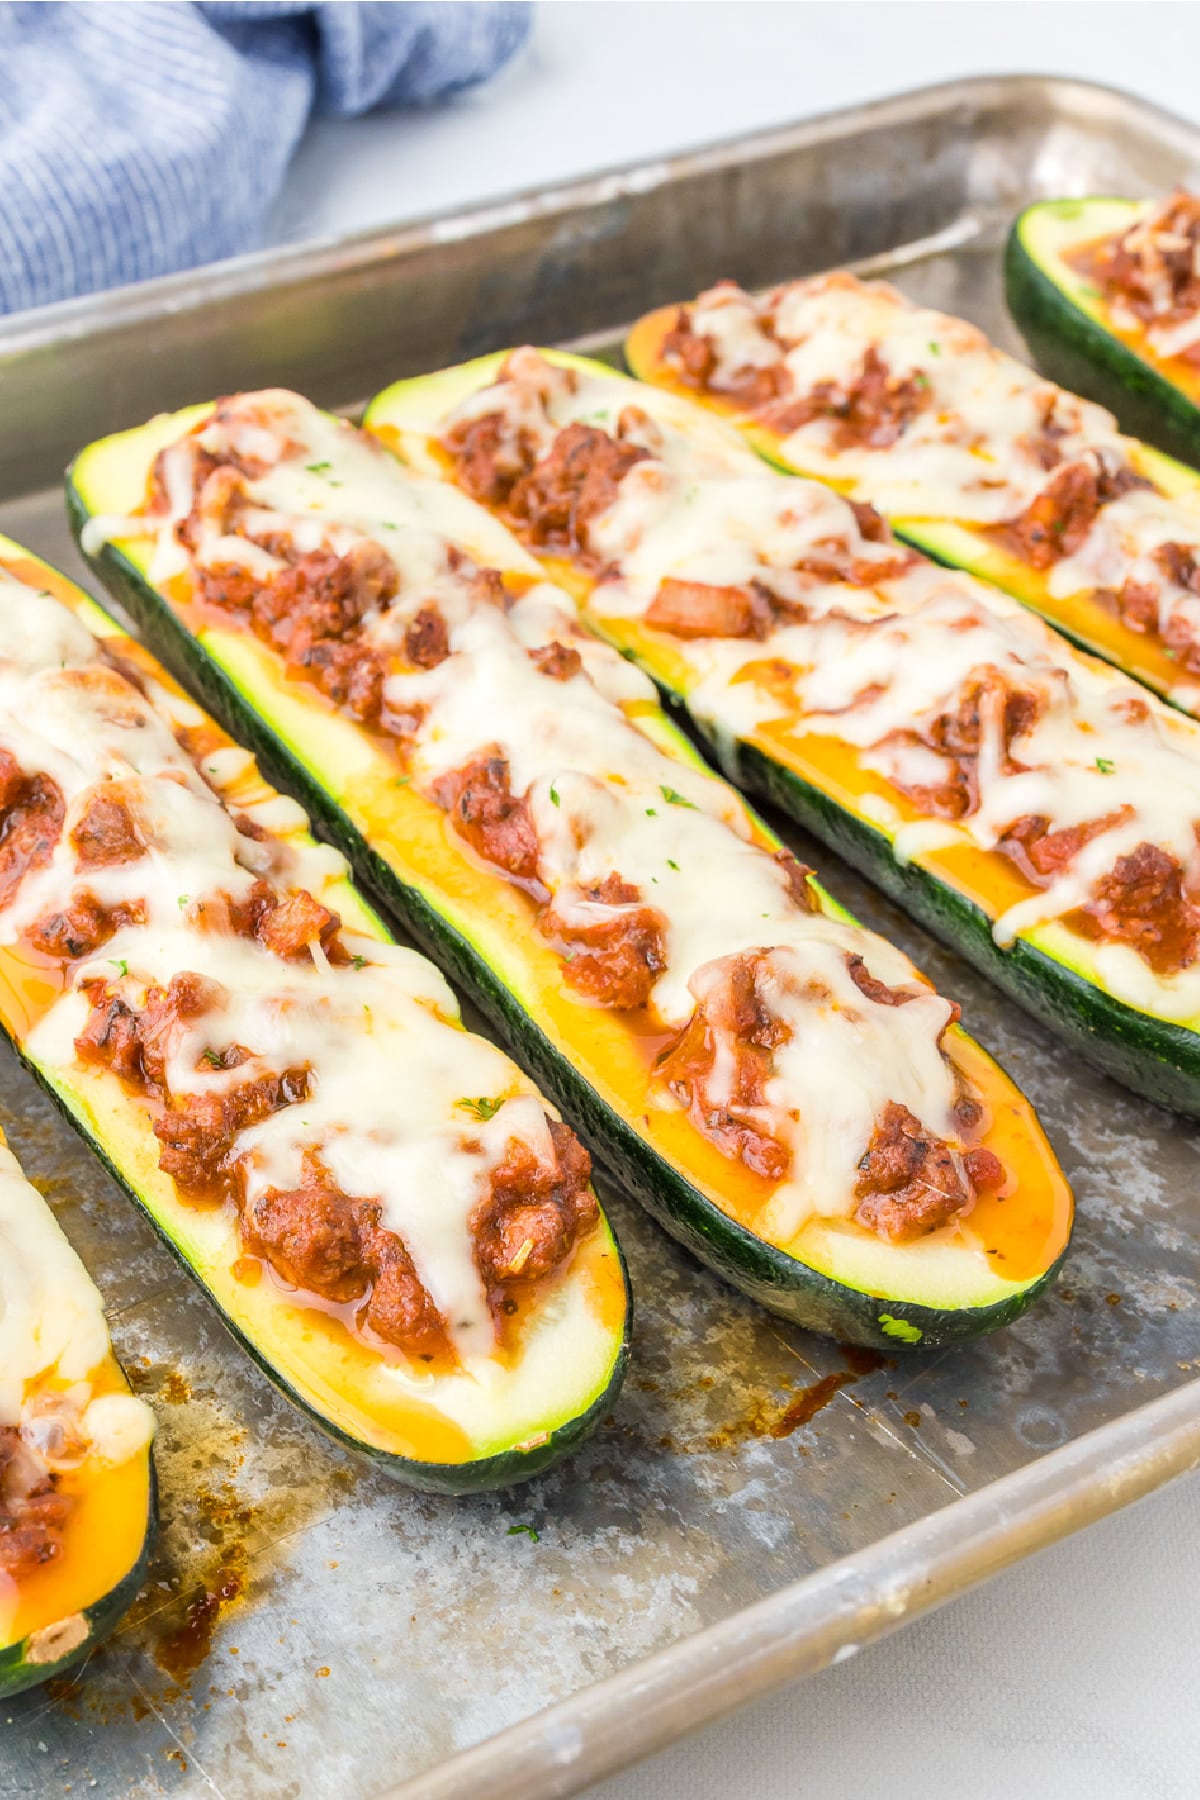 Stuffed zucchini boats full of italian ground beef and melted mozzarella cheese on a pan close up and at an angle.